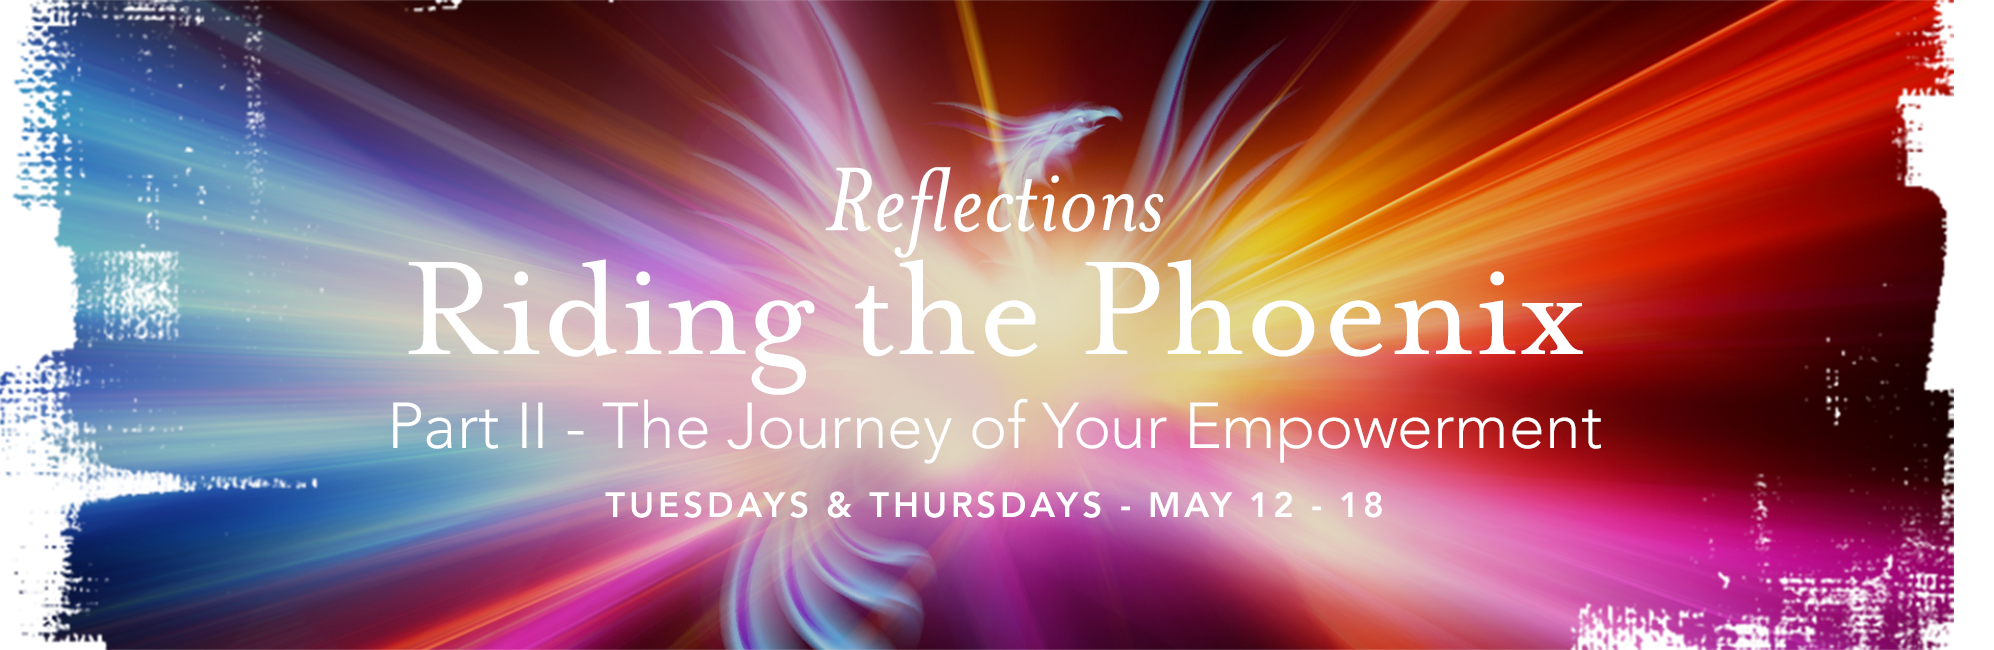 Riding the Phoenix Part II - The Journey to Your Empowerment